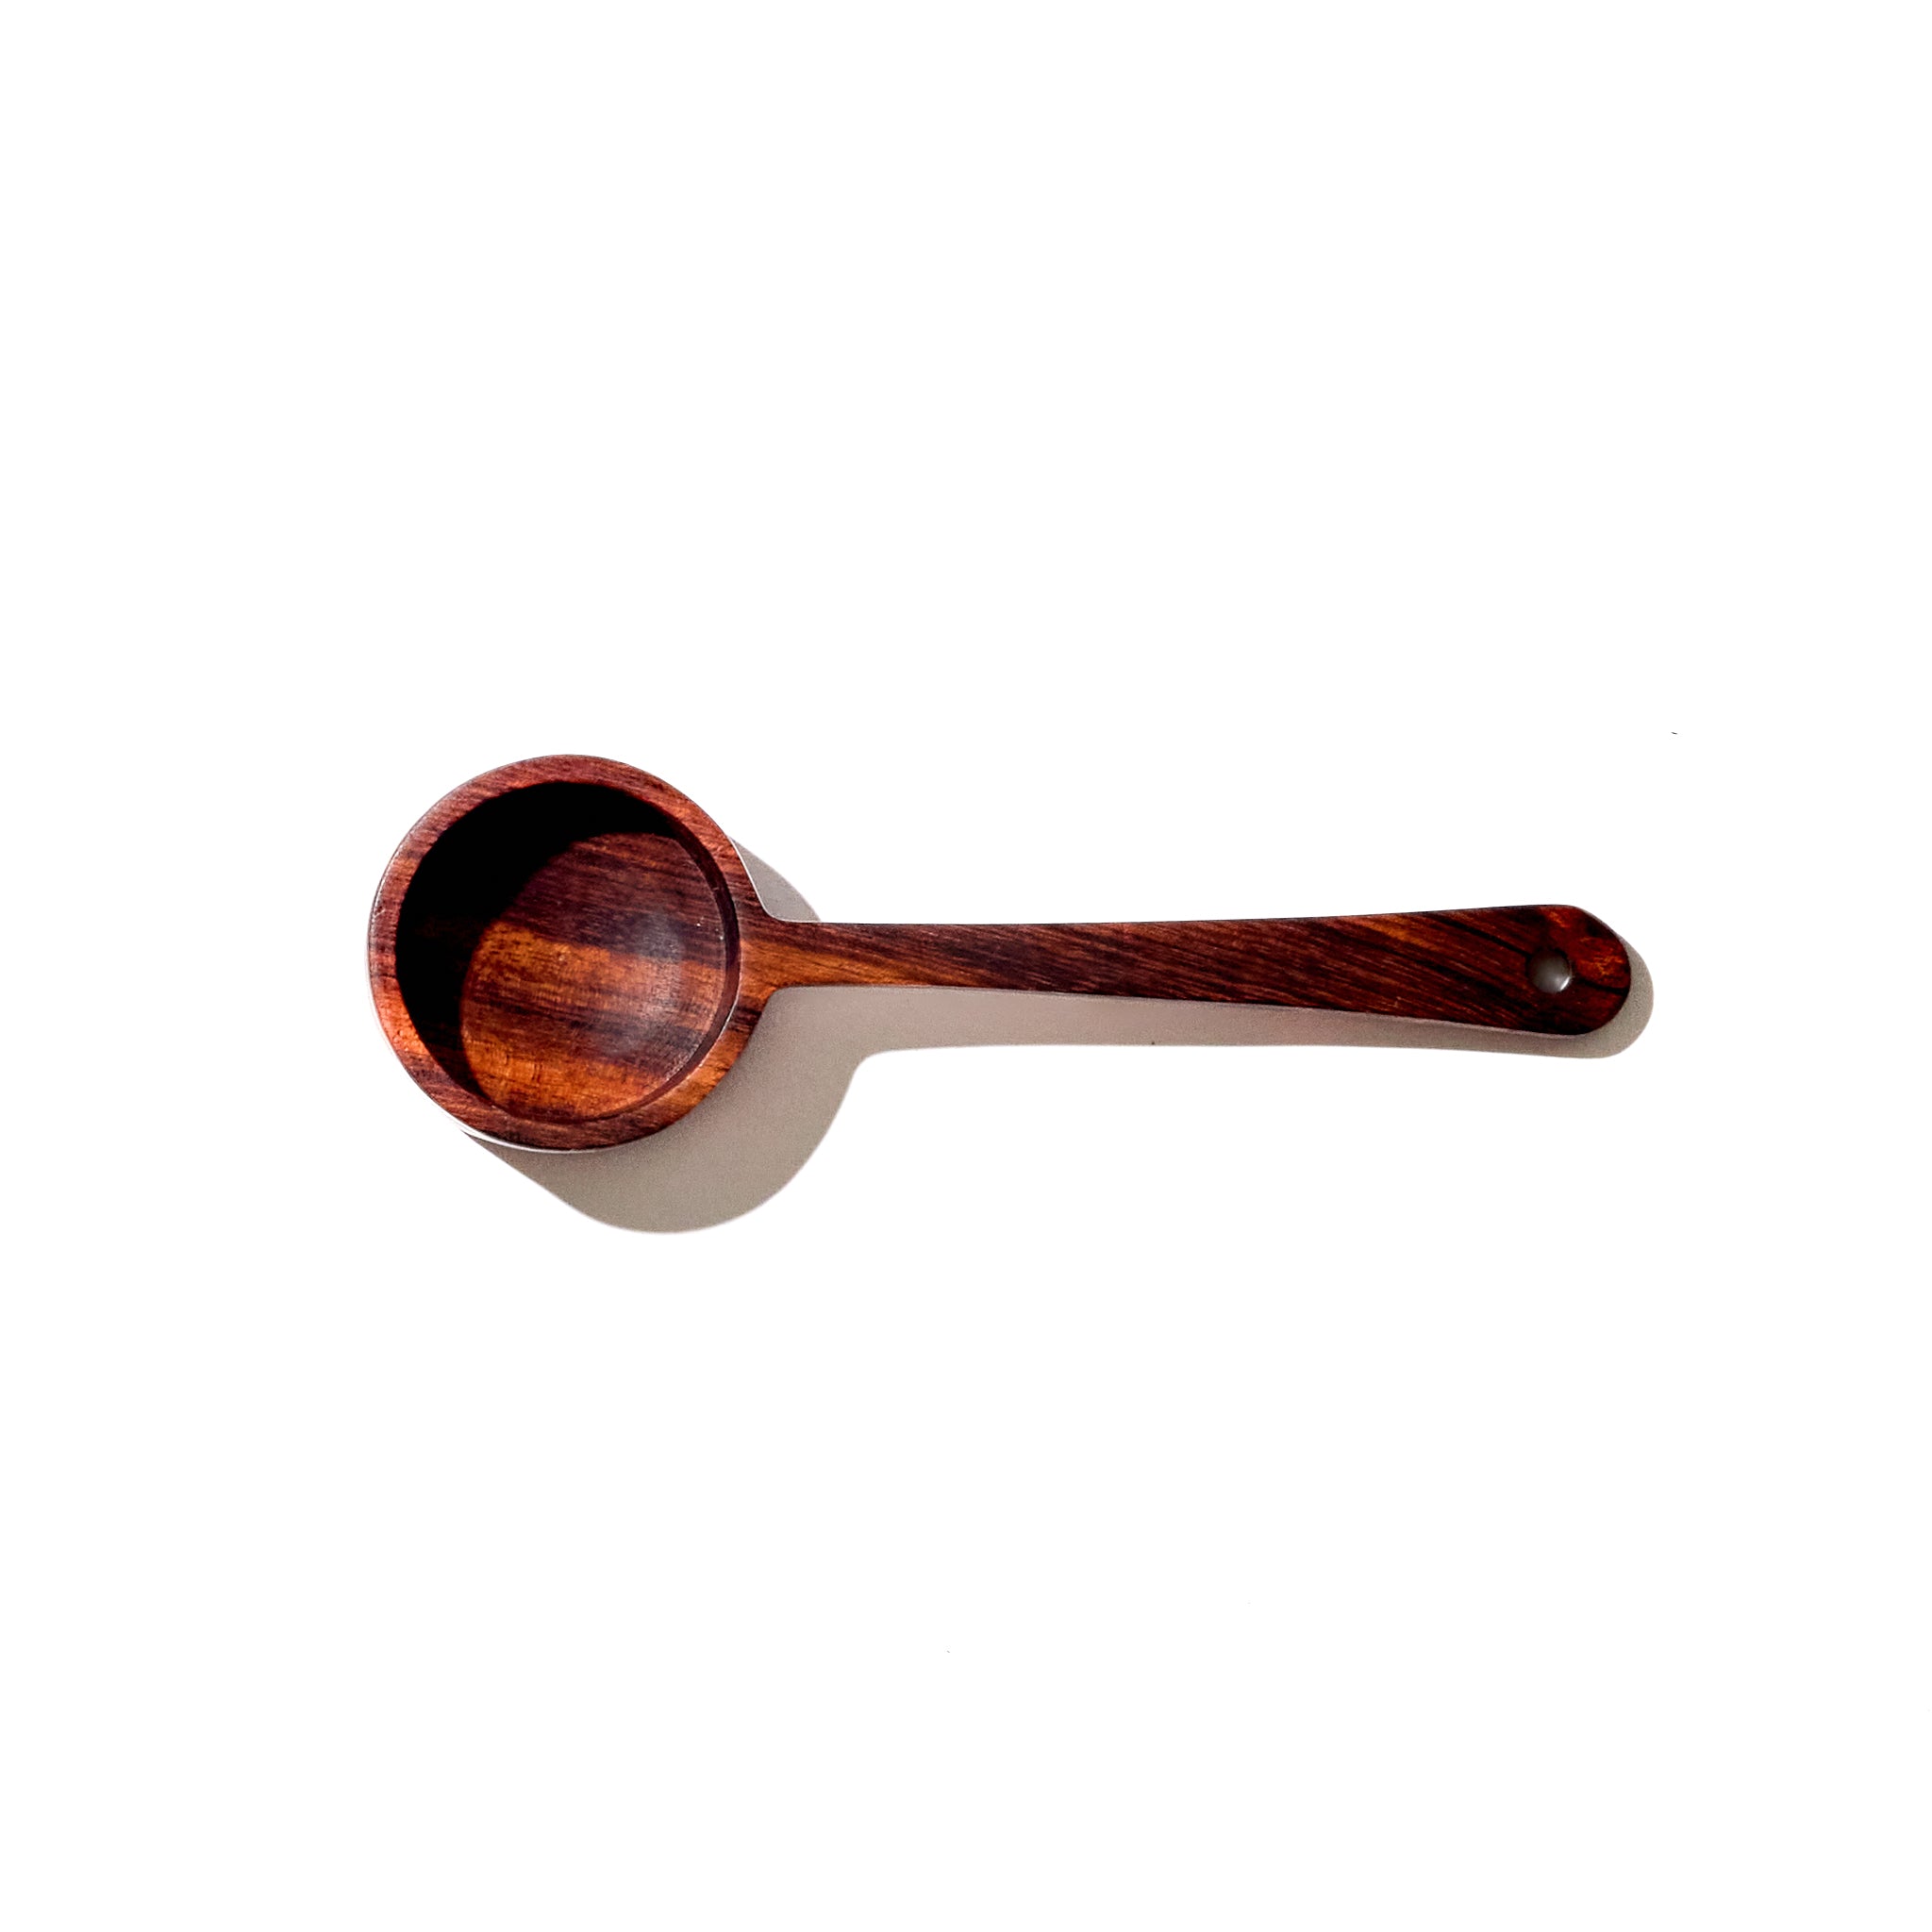 a wooden coffee scoop sitting on top of a white surface